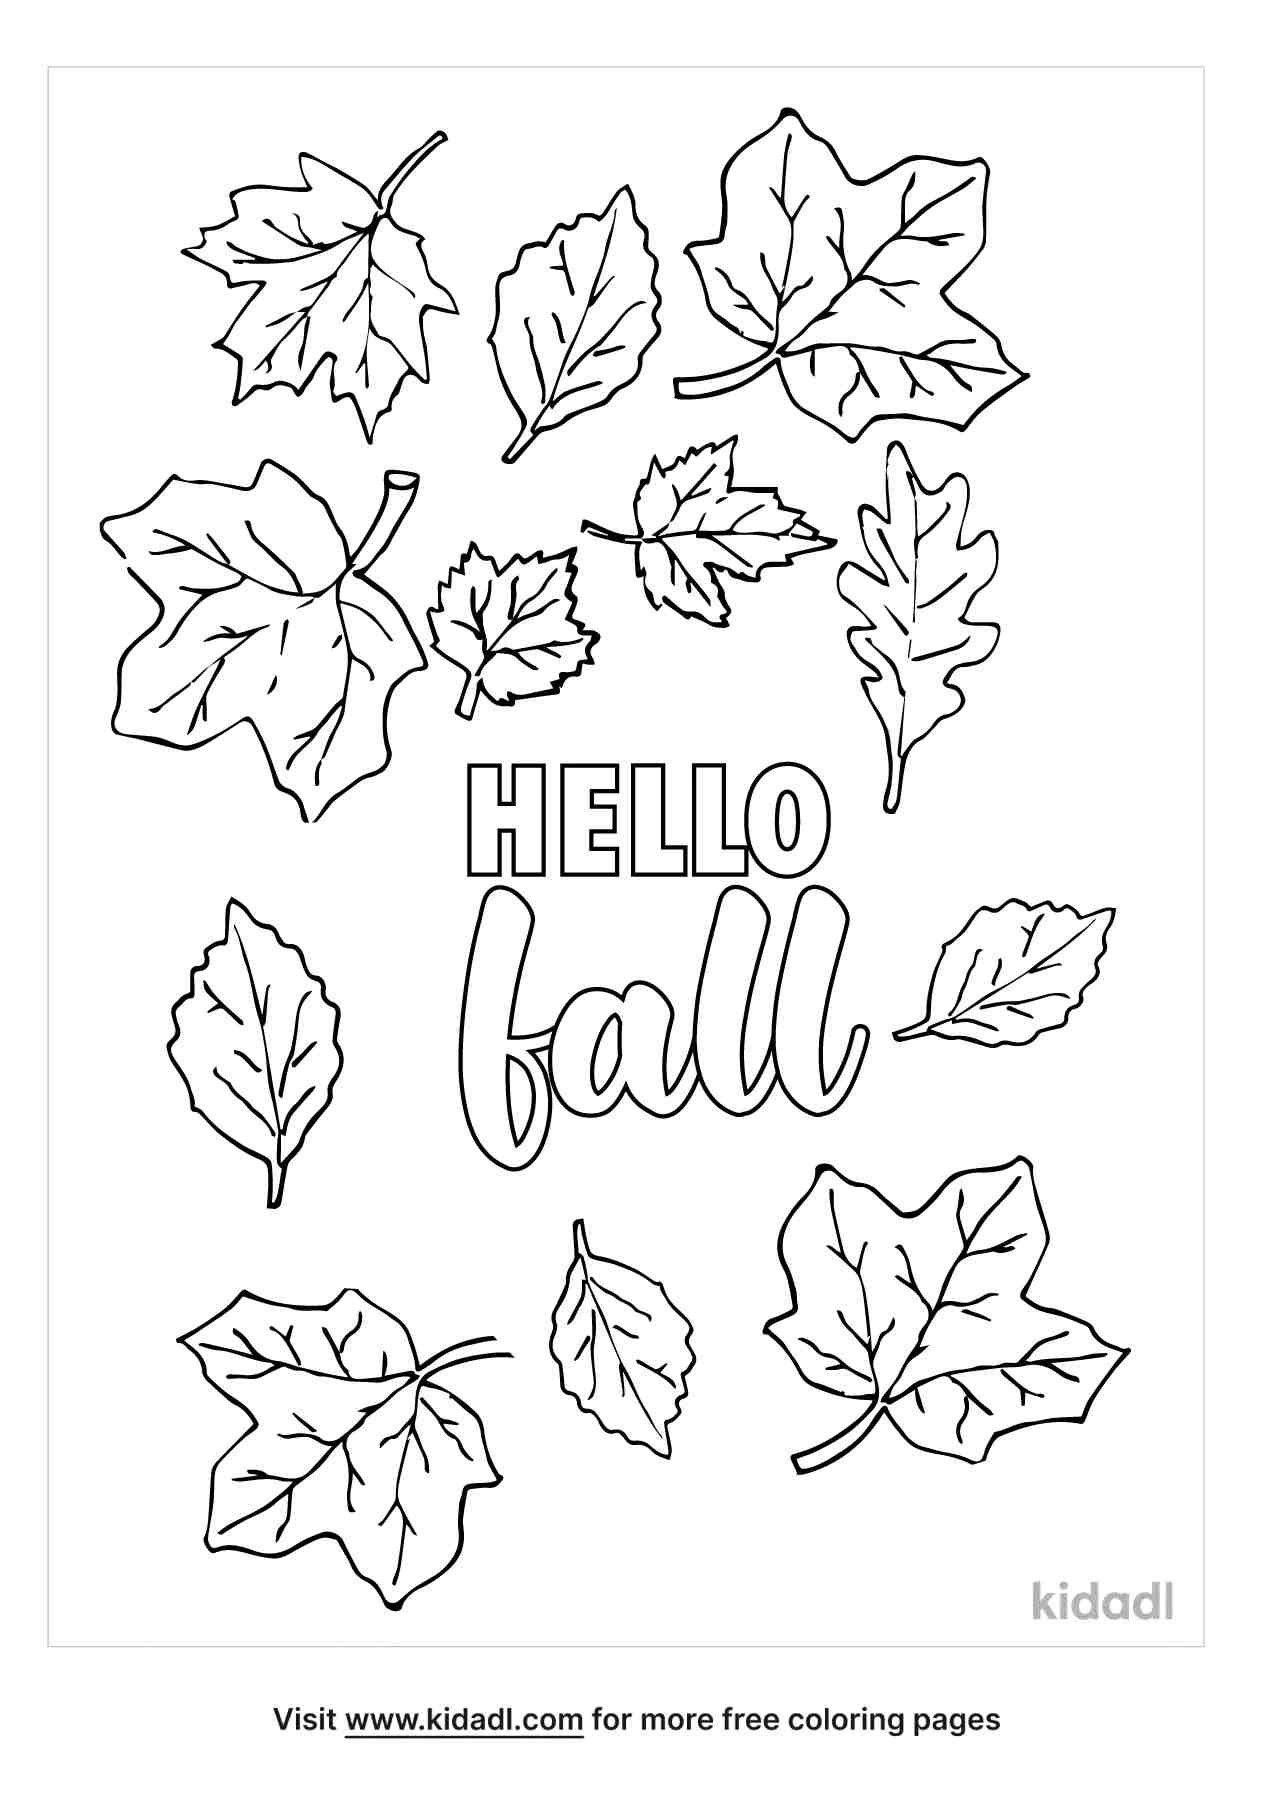 First day of autumn coloring page for kids.